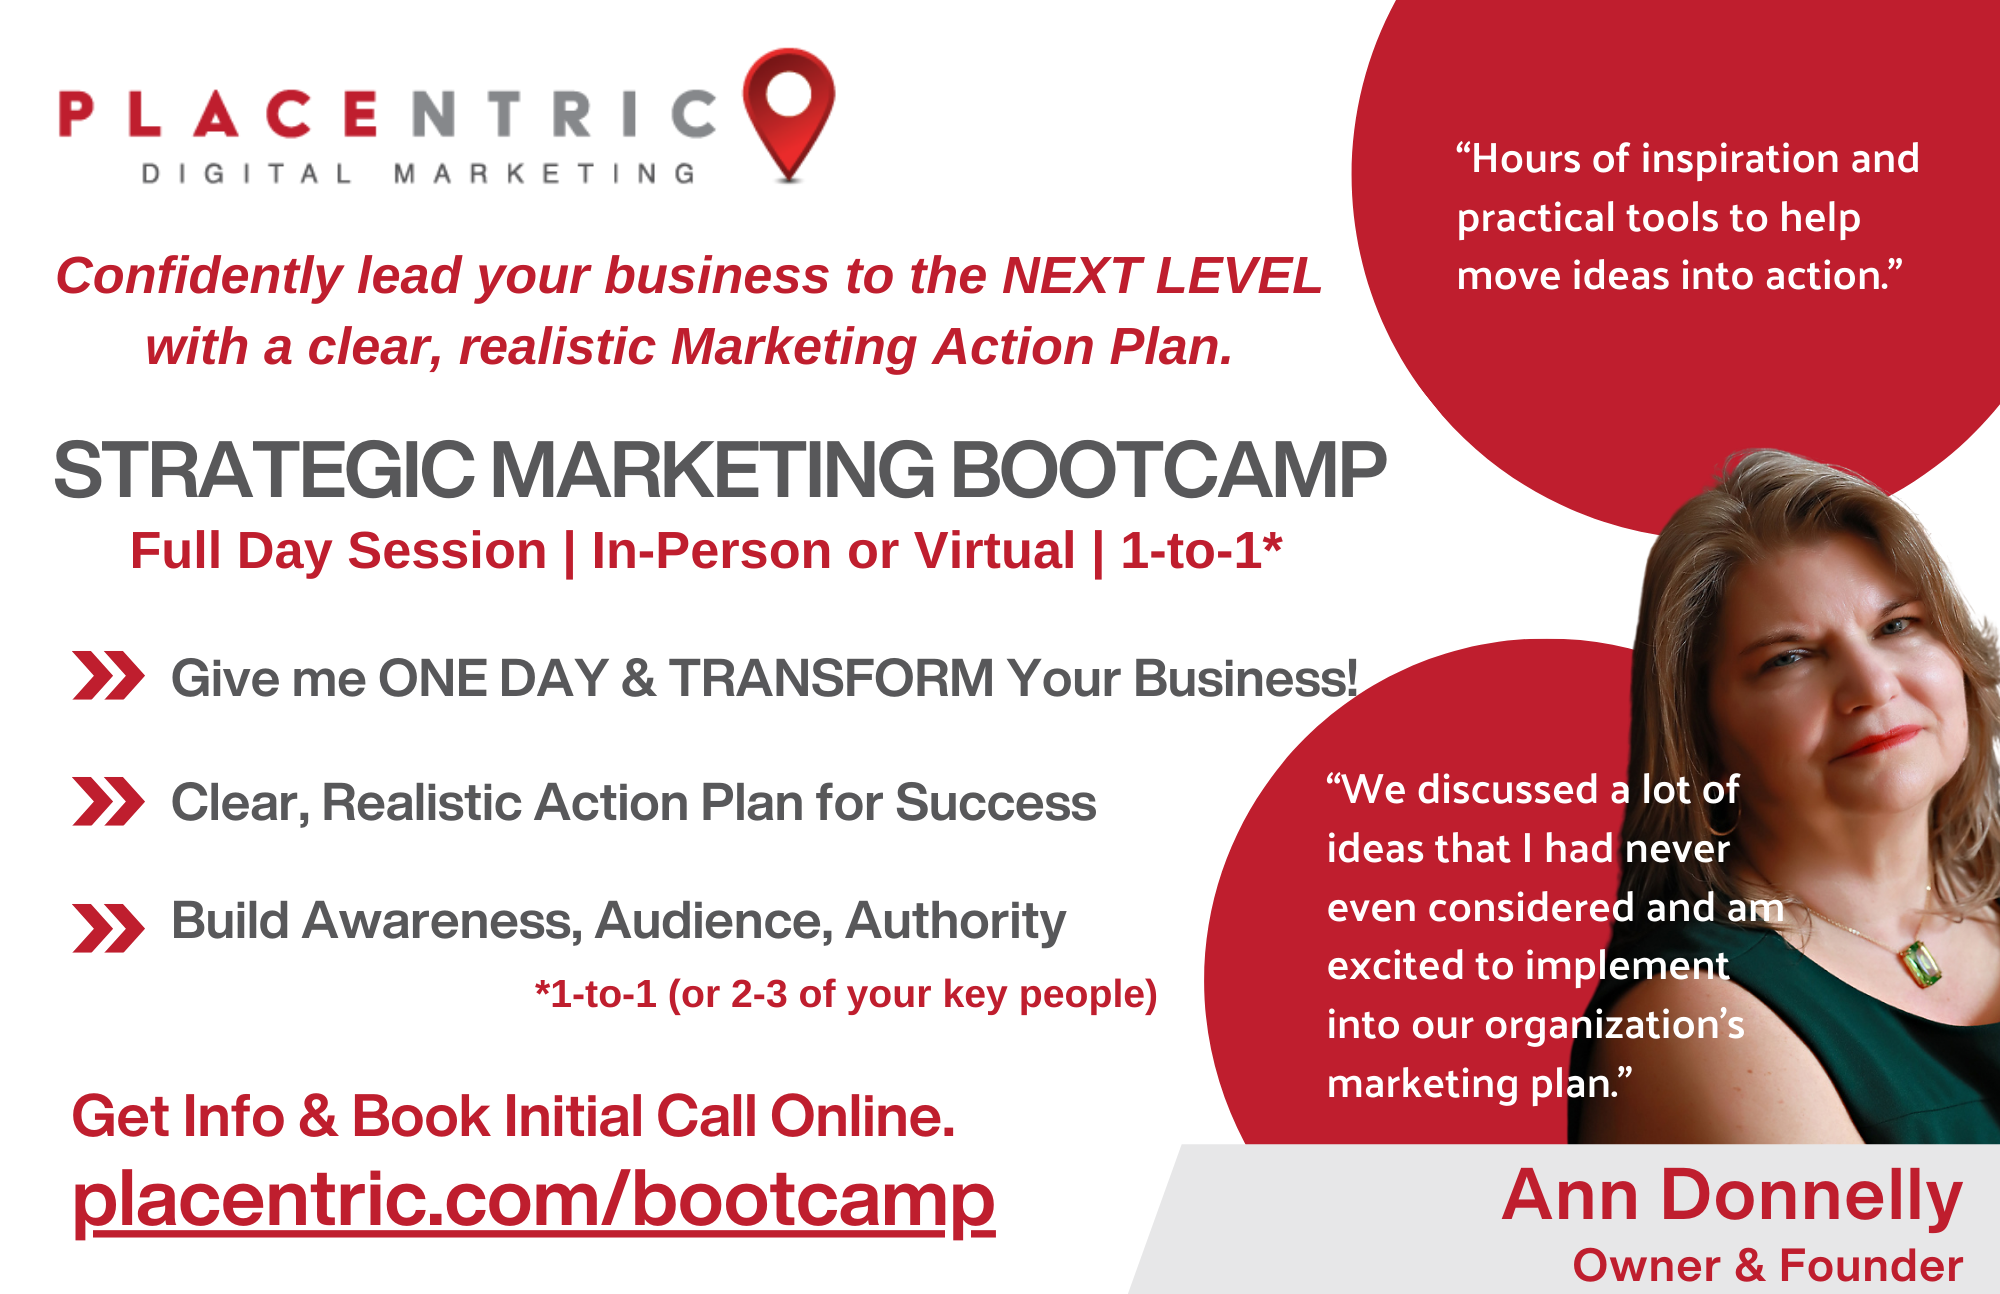 Confidently lead your business to the next level with a clear, realistic Marketing Action Plan. Strategic Marketing Bootcamp.